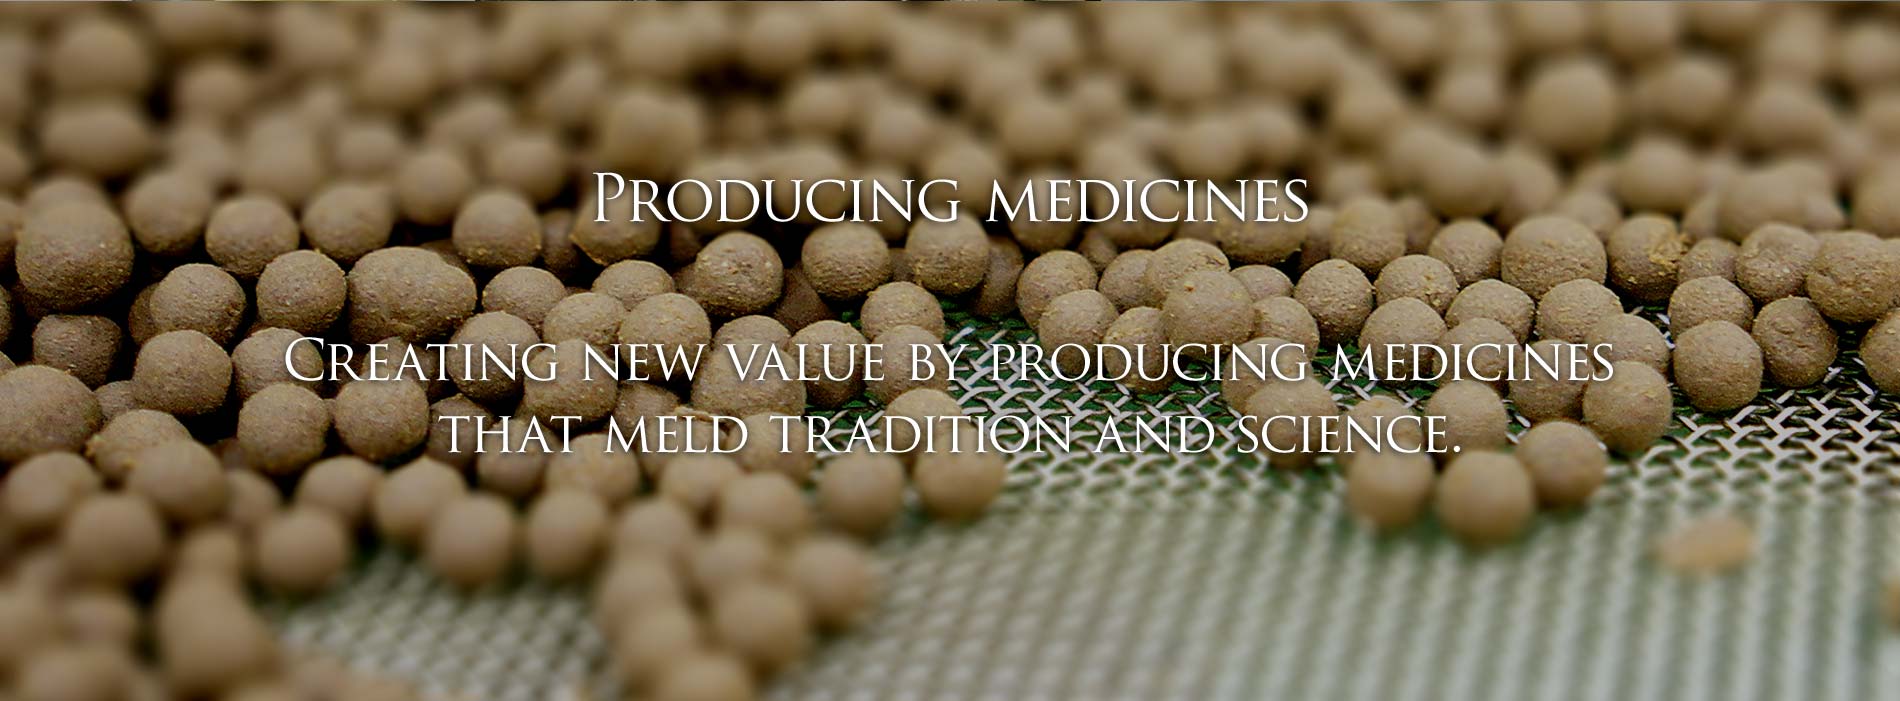 Producing medicines / Creating new value by producing medicines that meld tradition and science.